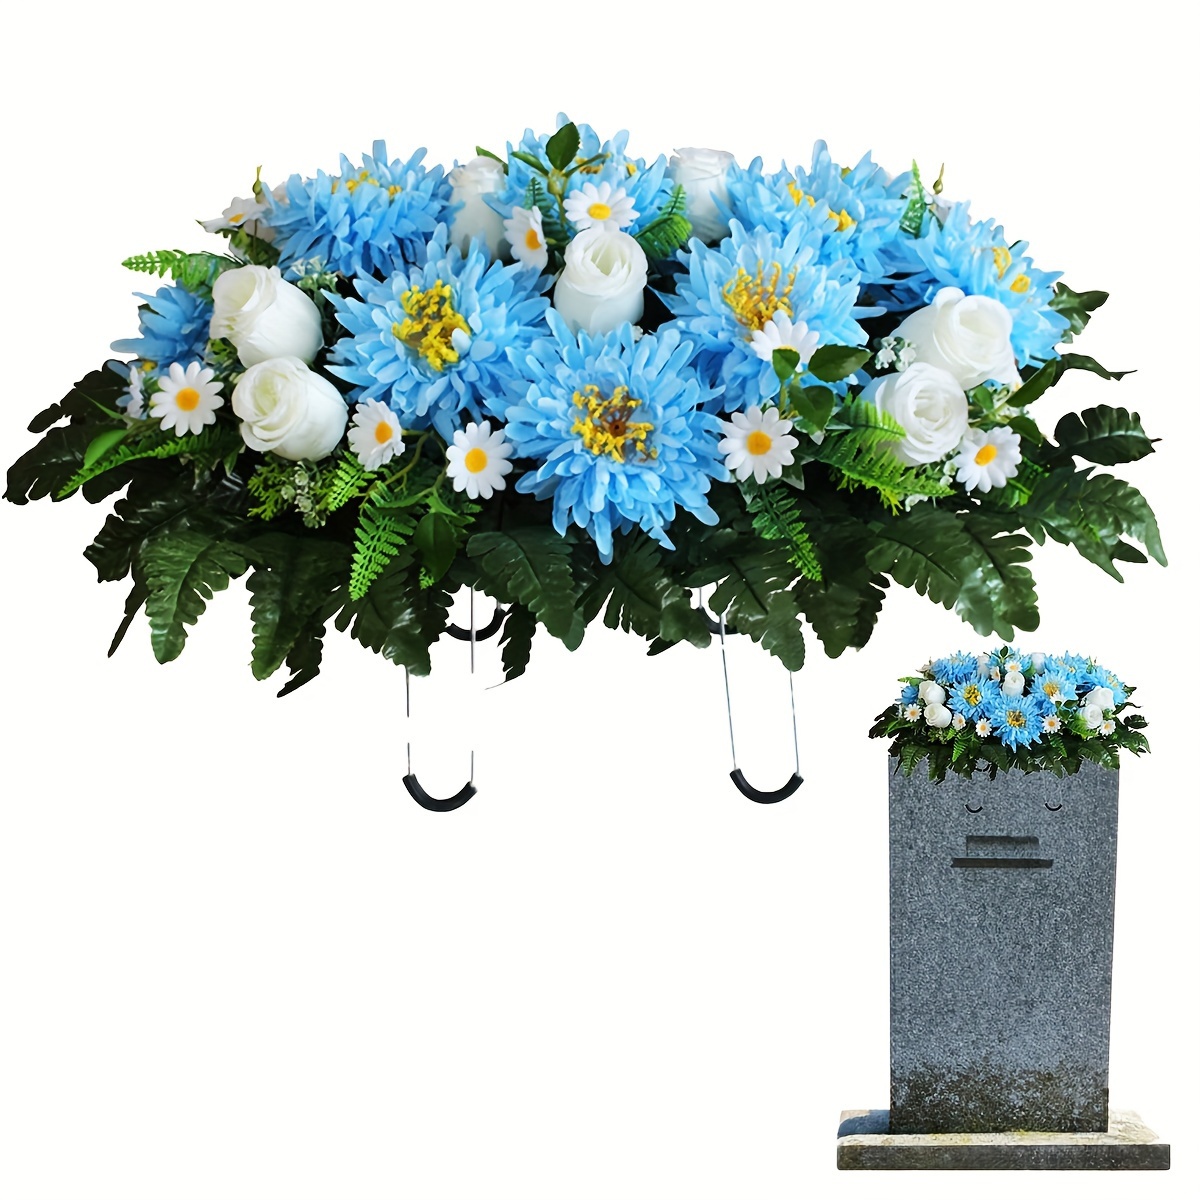 

Everlasting Chrysanthemum Cemetery Flowers - Weather-resistant, No-maintenance Outdoor Grave Decorations With Secure Headstone Saddle